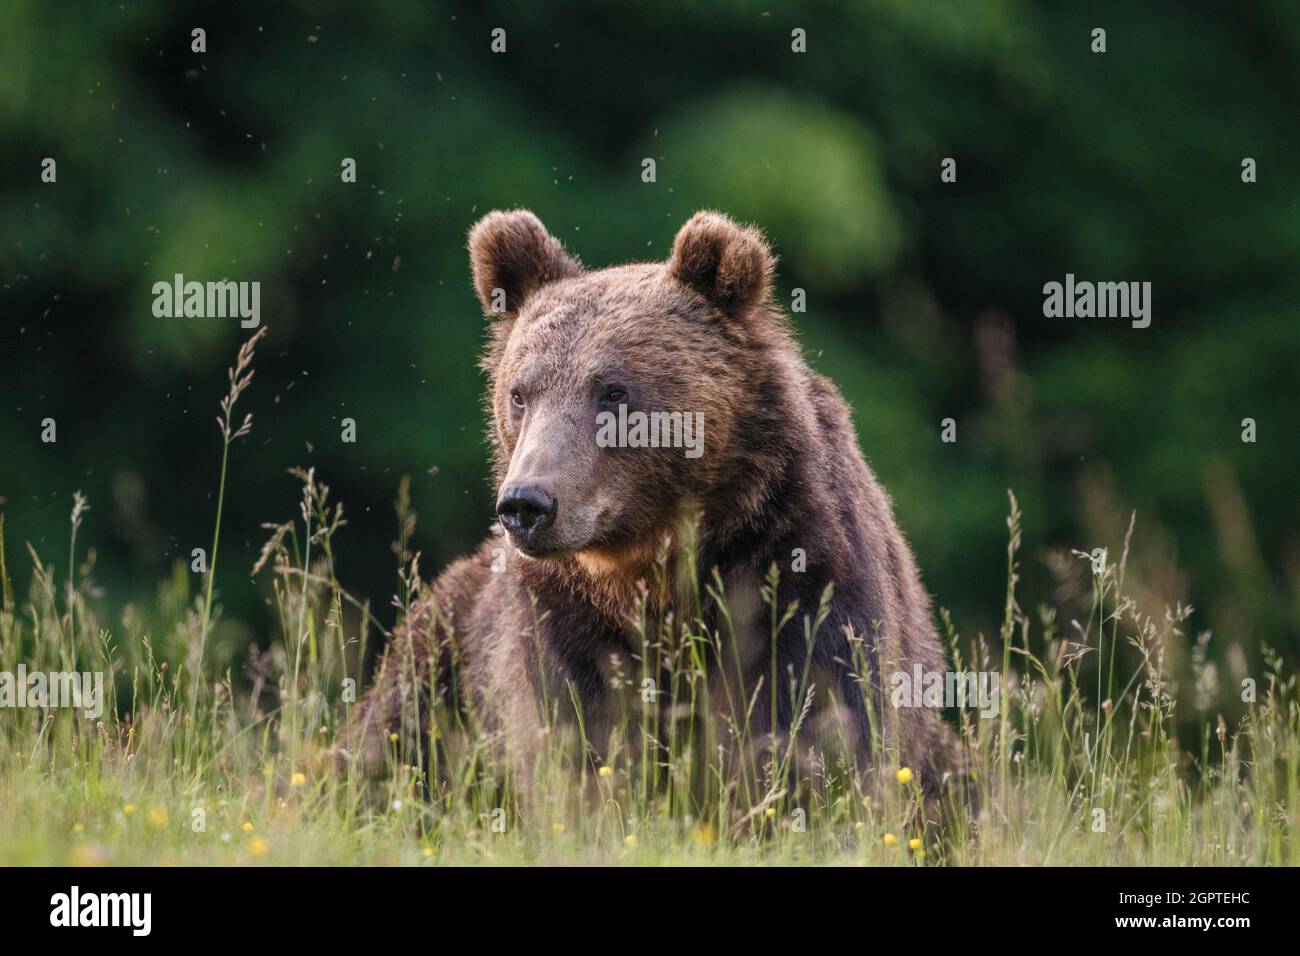 Carpathian brown bear portrait, in natural environment in the woods of Romania, with green forest background. Stock Photo